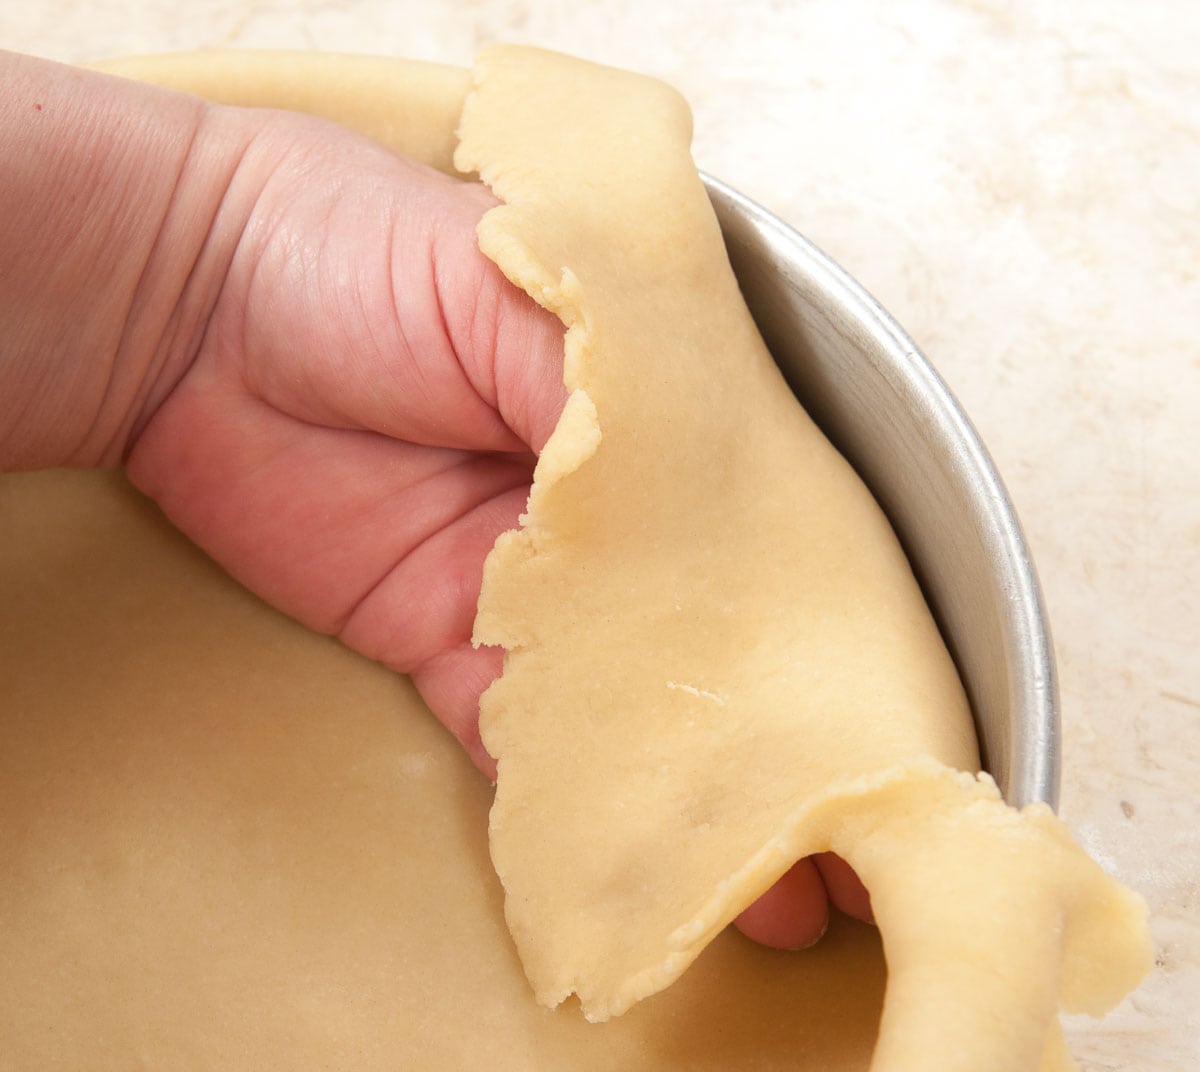 Fitting the dough into the edges of the pan ensuring a 90° angle.